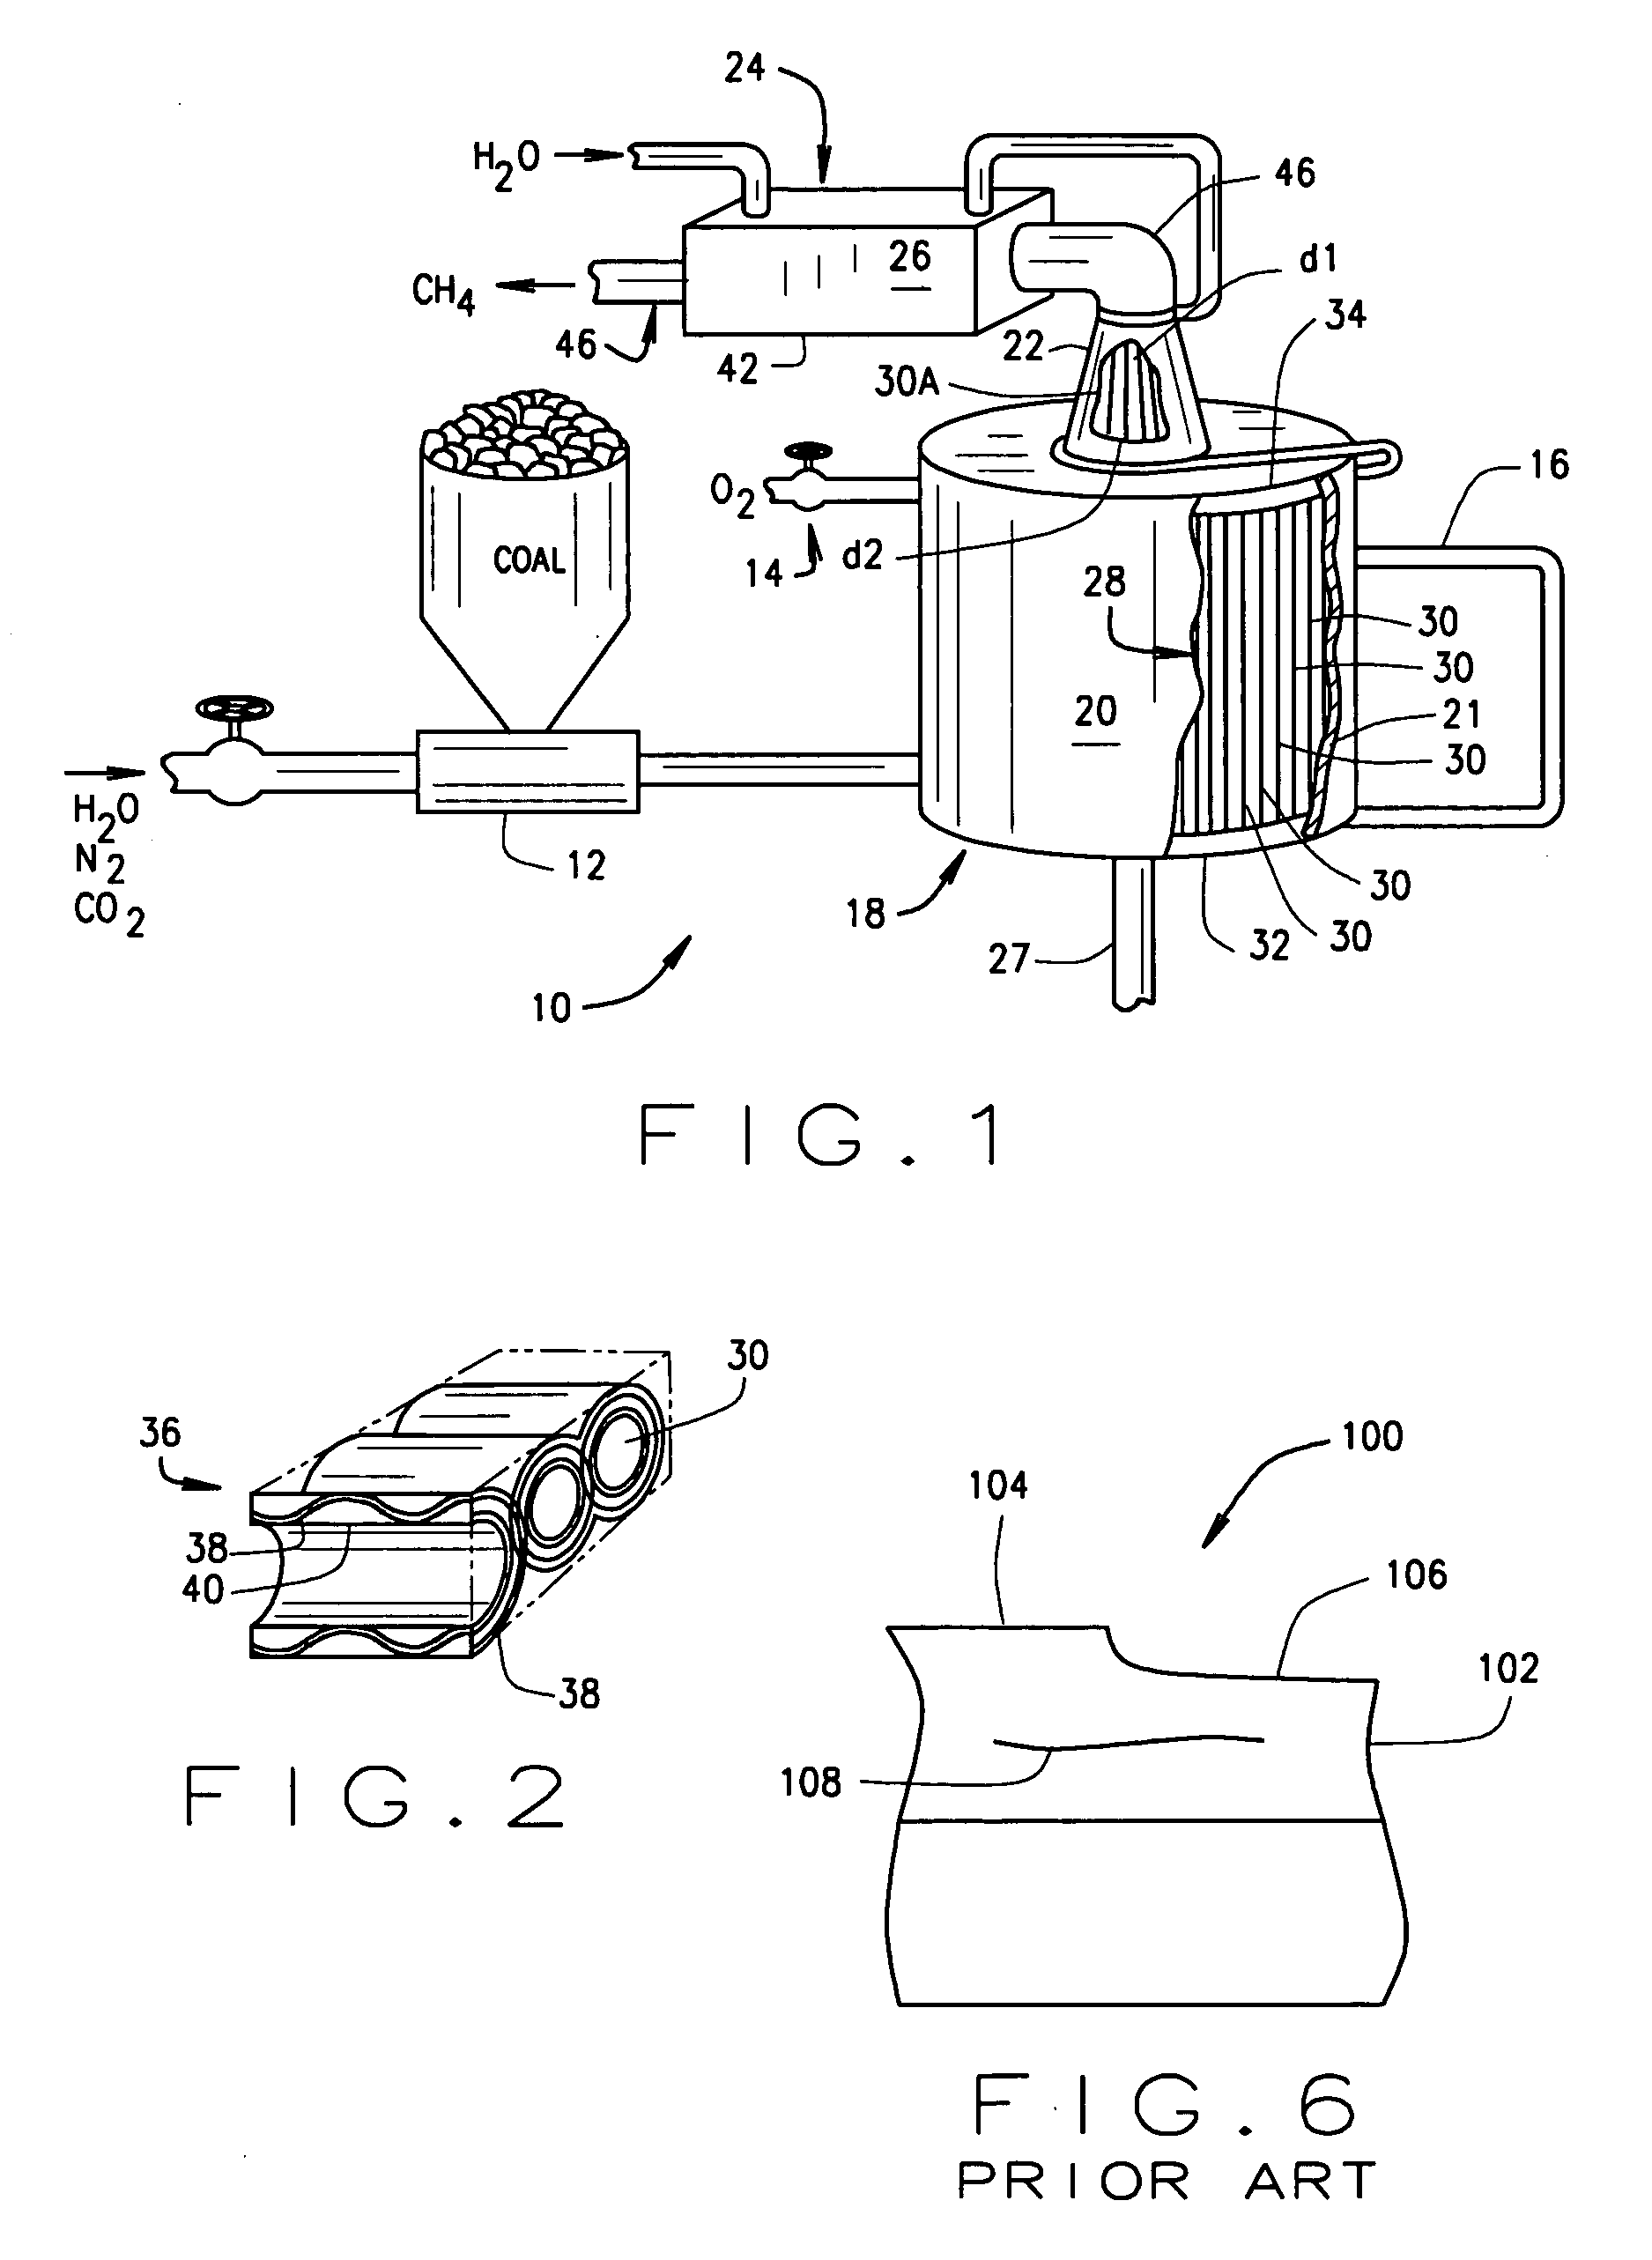 Regeneratively cooled synthesis gas generator